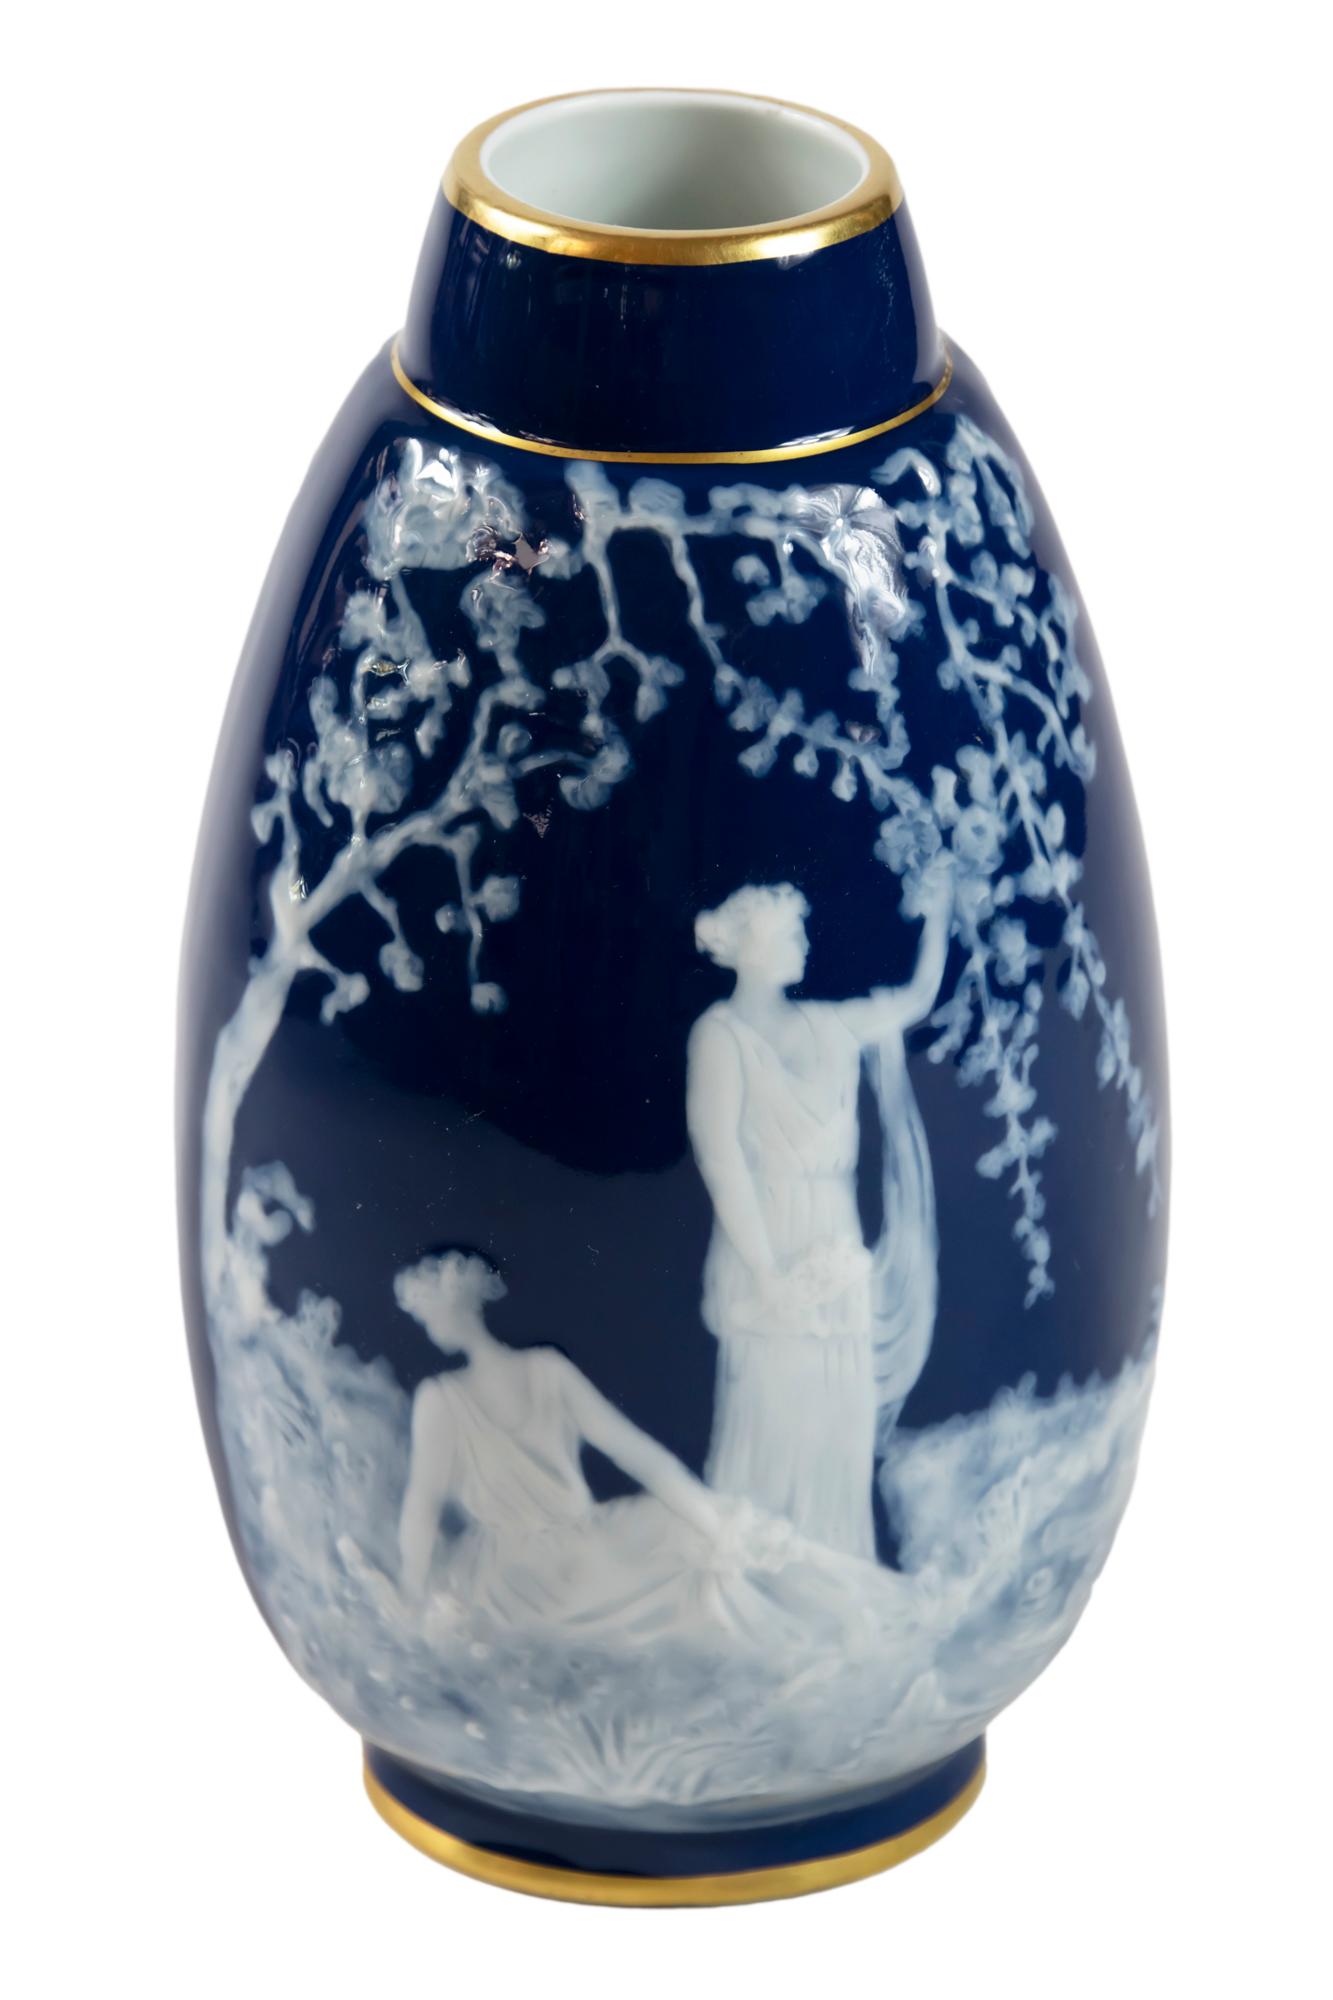 A cobalt blue background Limoges vase and pate-sur-pate technique with scene of female figures.
Signed Marcel Chaufriasse Limoges.
Very good vintage condition.